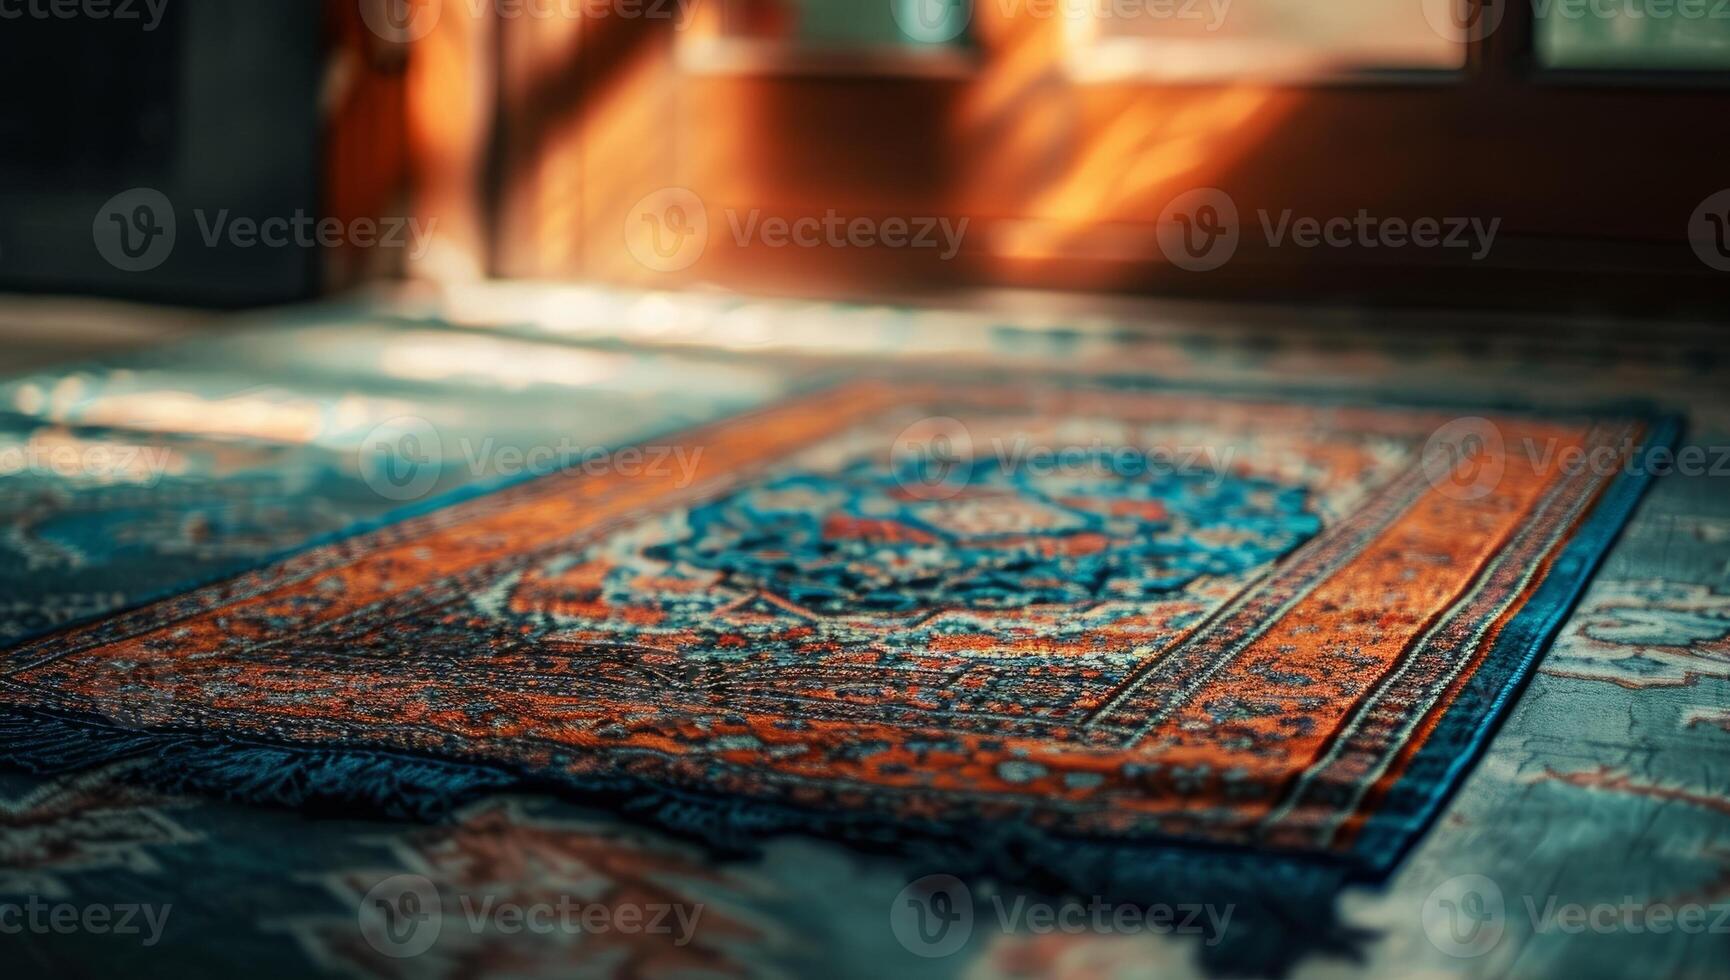 AI generated Ornate vintage Persian rug with intricate patterns in warm tones on wooden floor. Concept of timeless Middle Eastern textile art and craftsmanship. photo